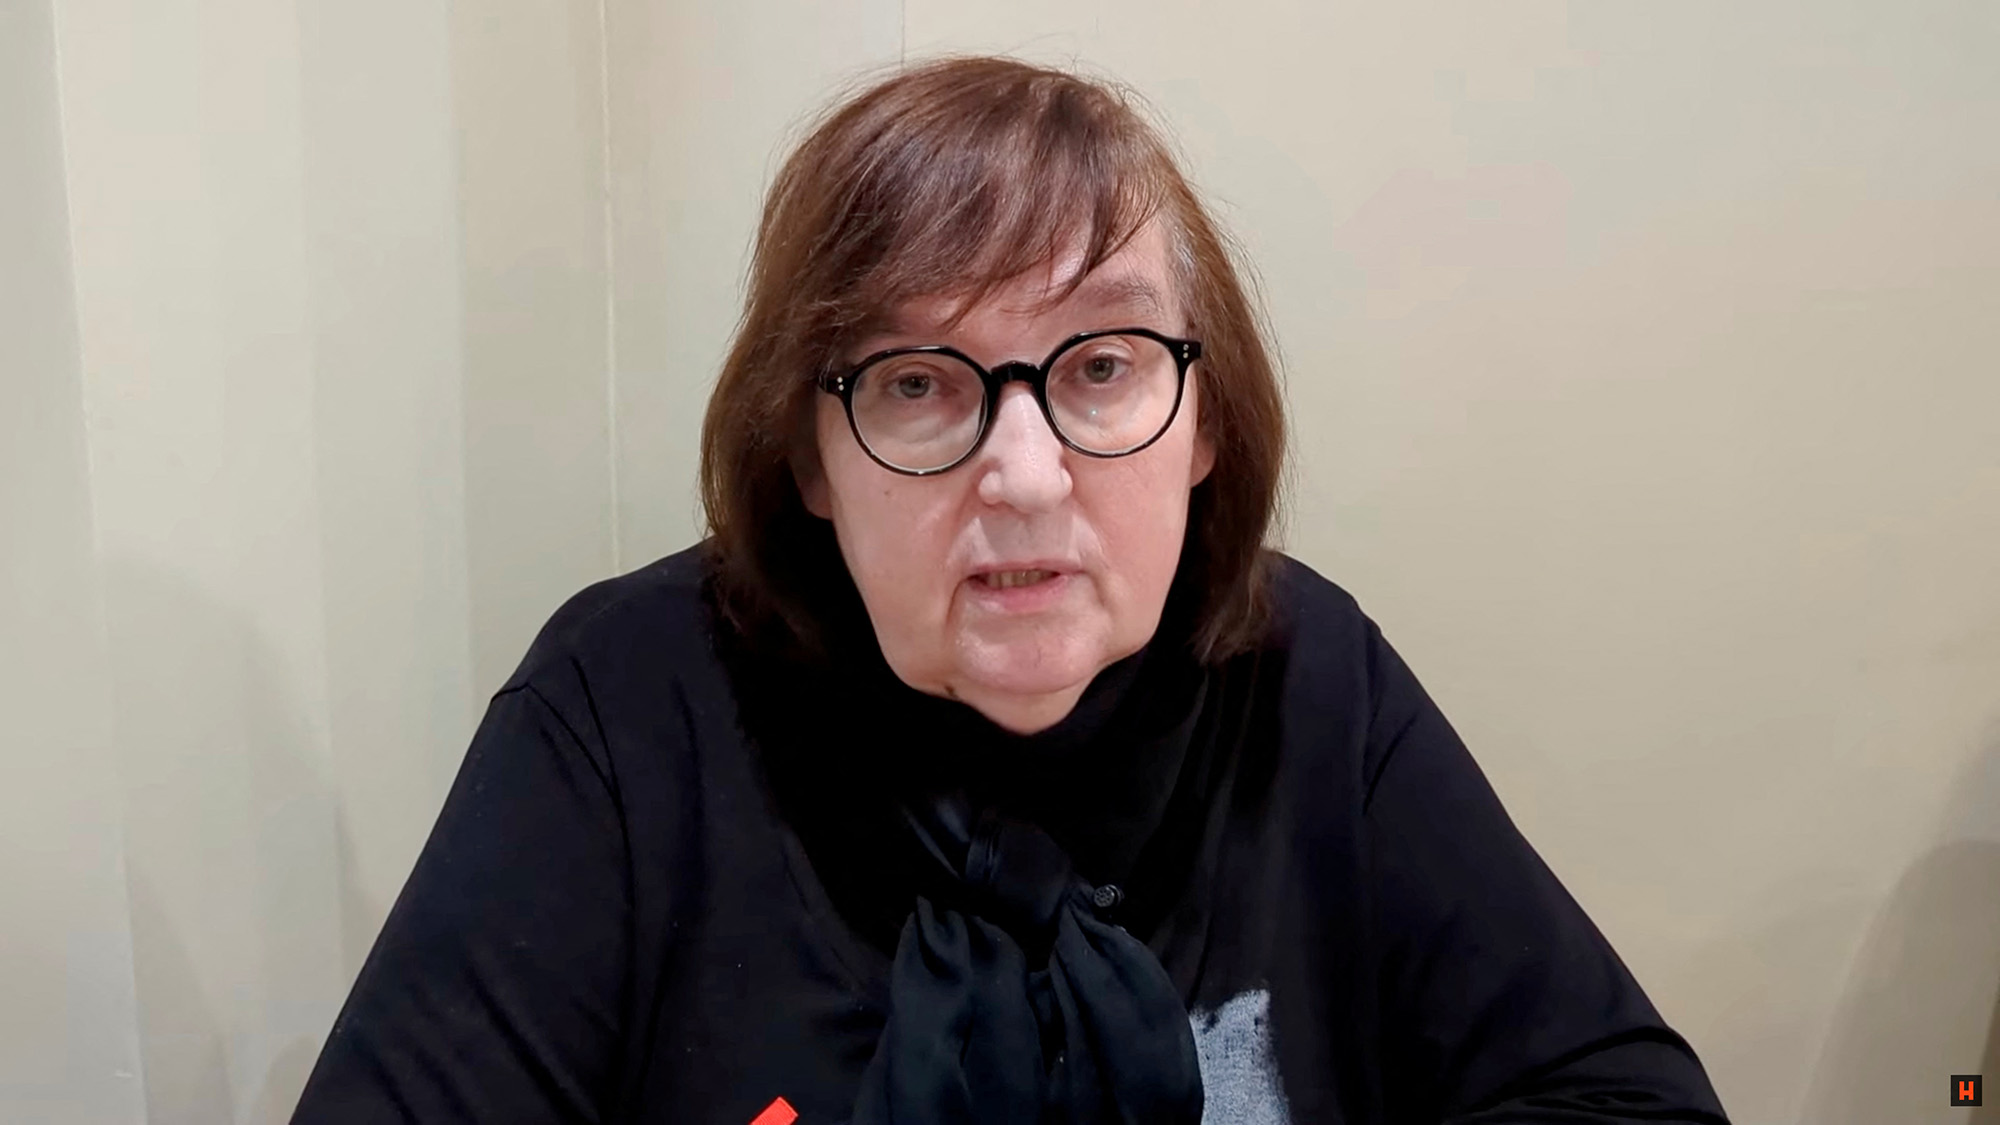 Lyudmila Navalnaya, mother of leader Alexei Navalny, delivers a video address in Salekhard, Russia, in this still image taken from a handout video released on February 22.